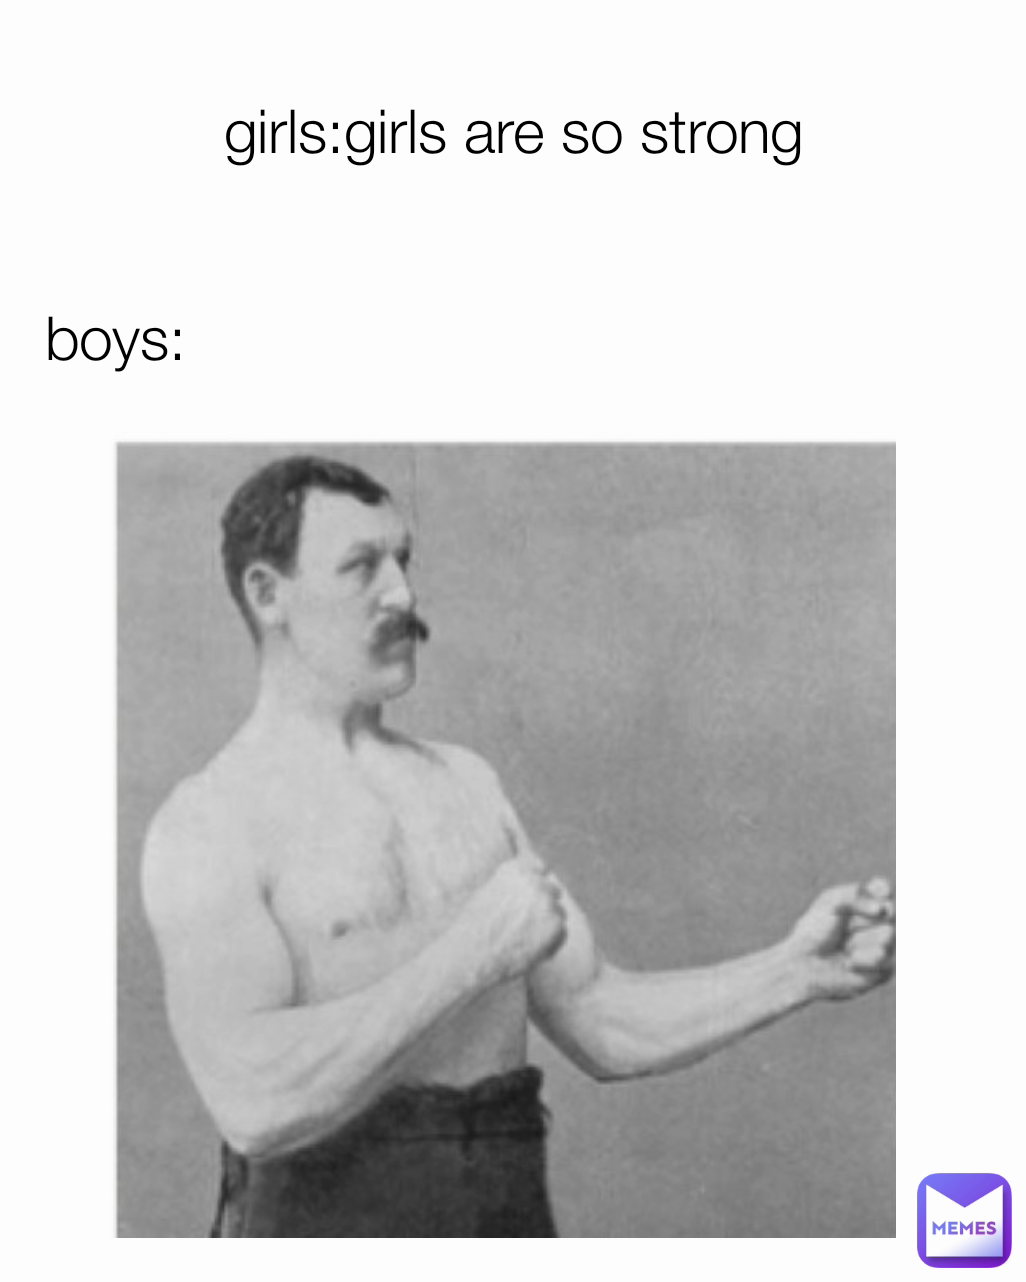 boys: girls:girls are so strong